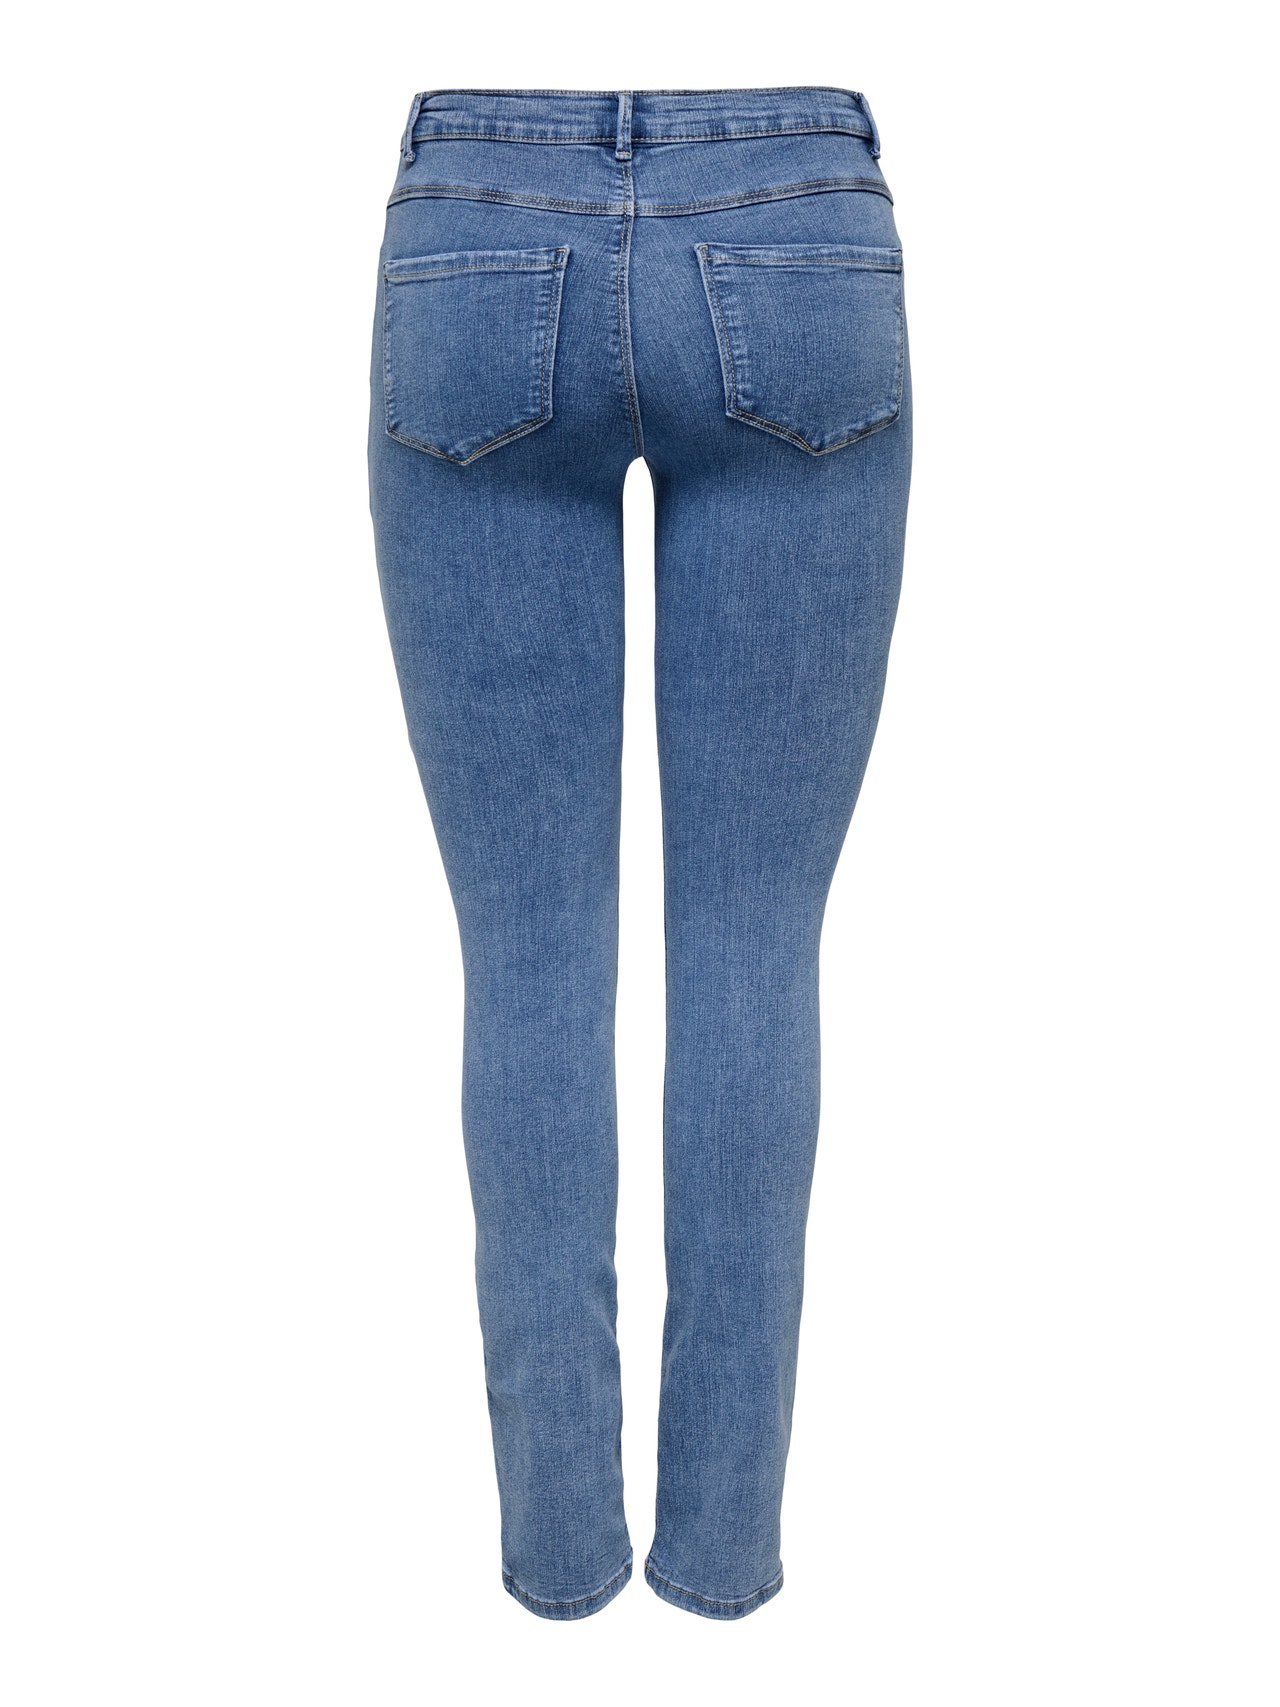 ONLY Jeans Slim Fit Taille moyenne Tall -Medium Blue Denim - 15275307